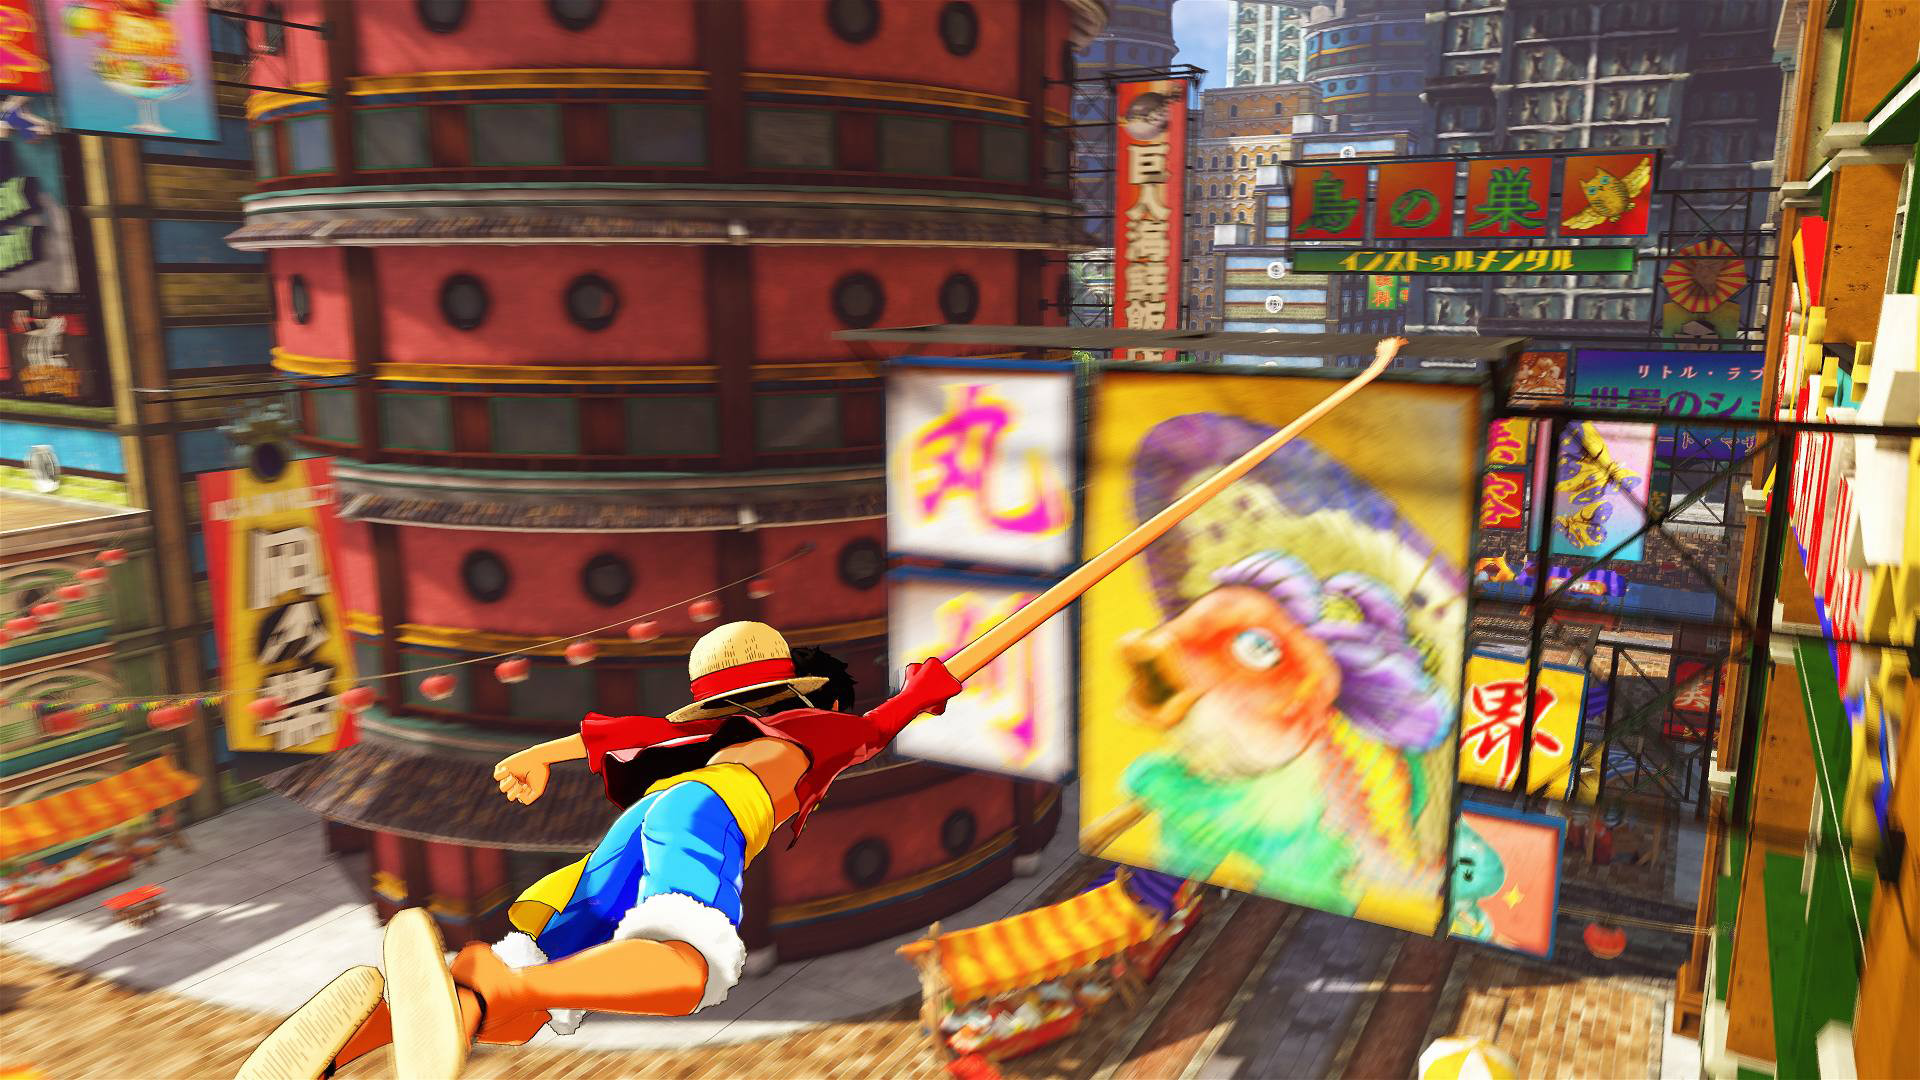 ONE PIECE World Seeker Deluxe Edition (English, Japanese)